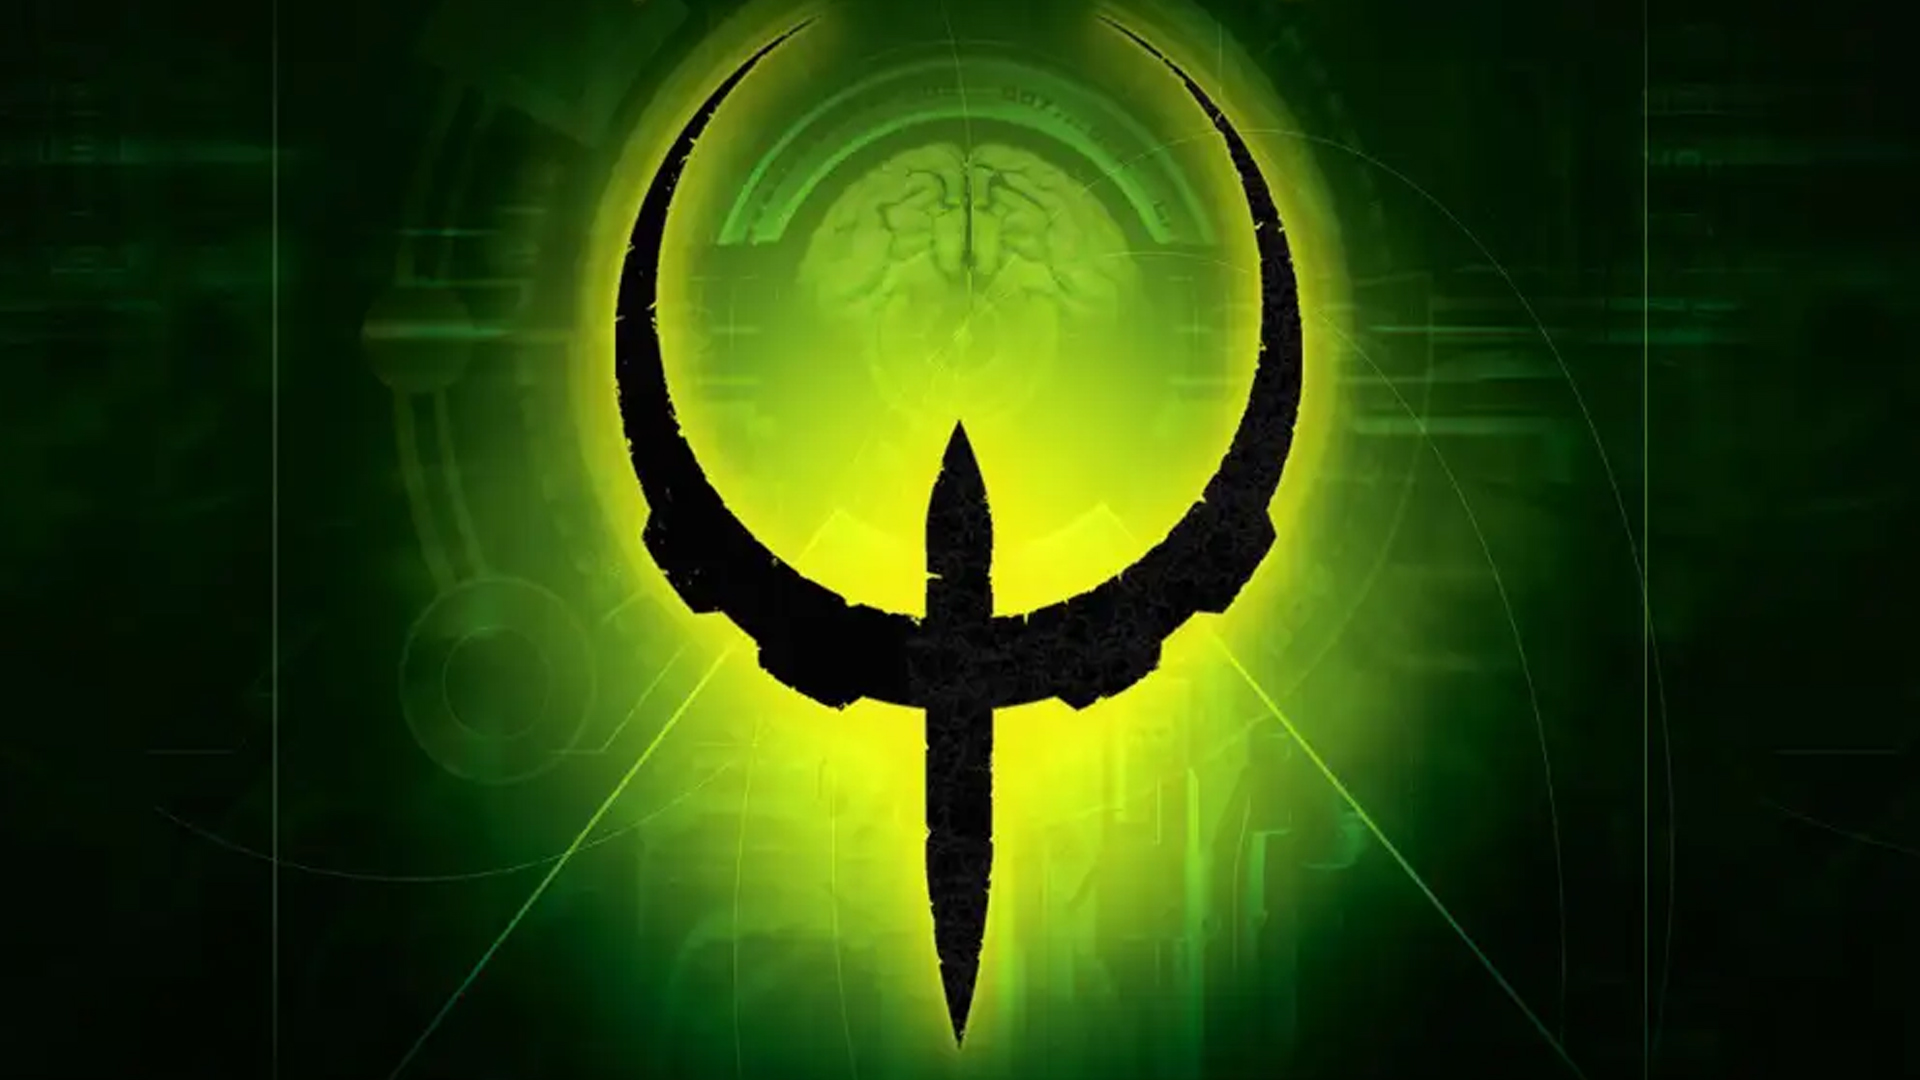 Xbox wants you to play Quake 4 on PC – wait, what?